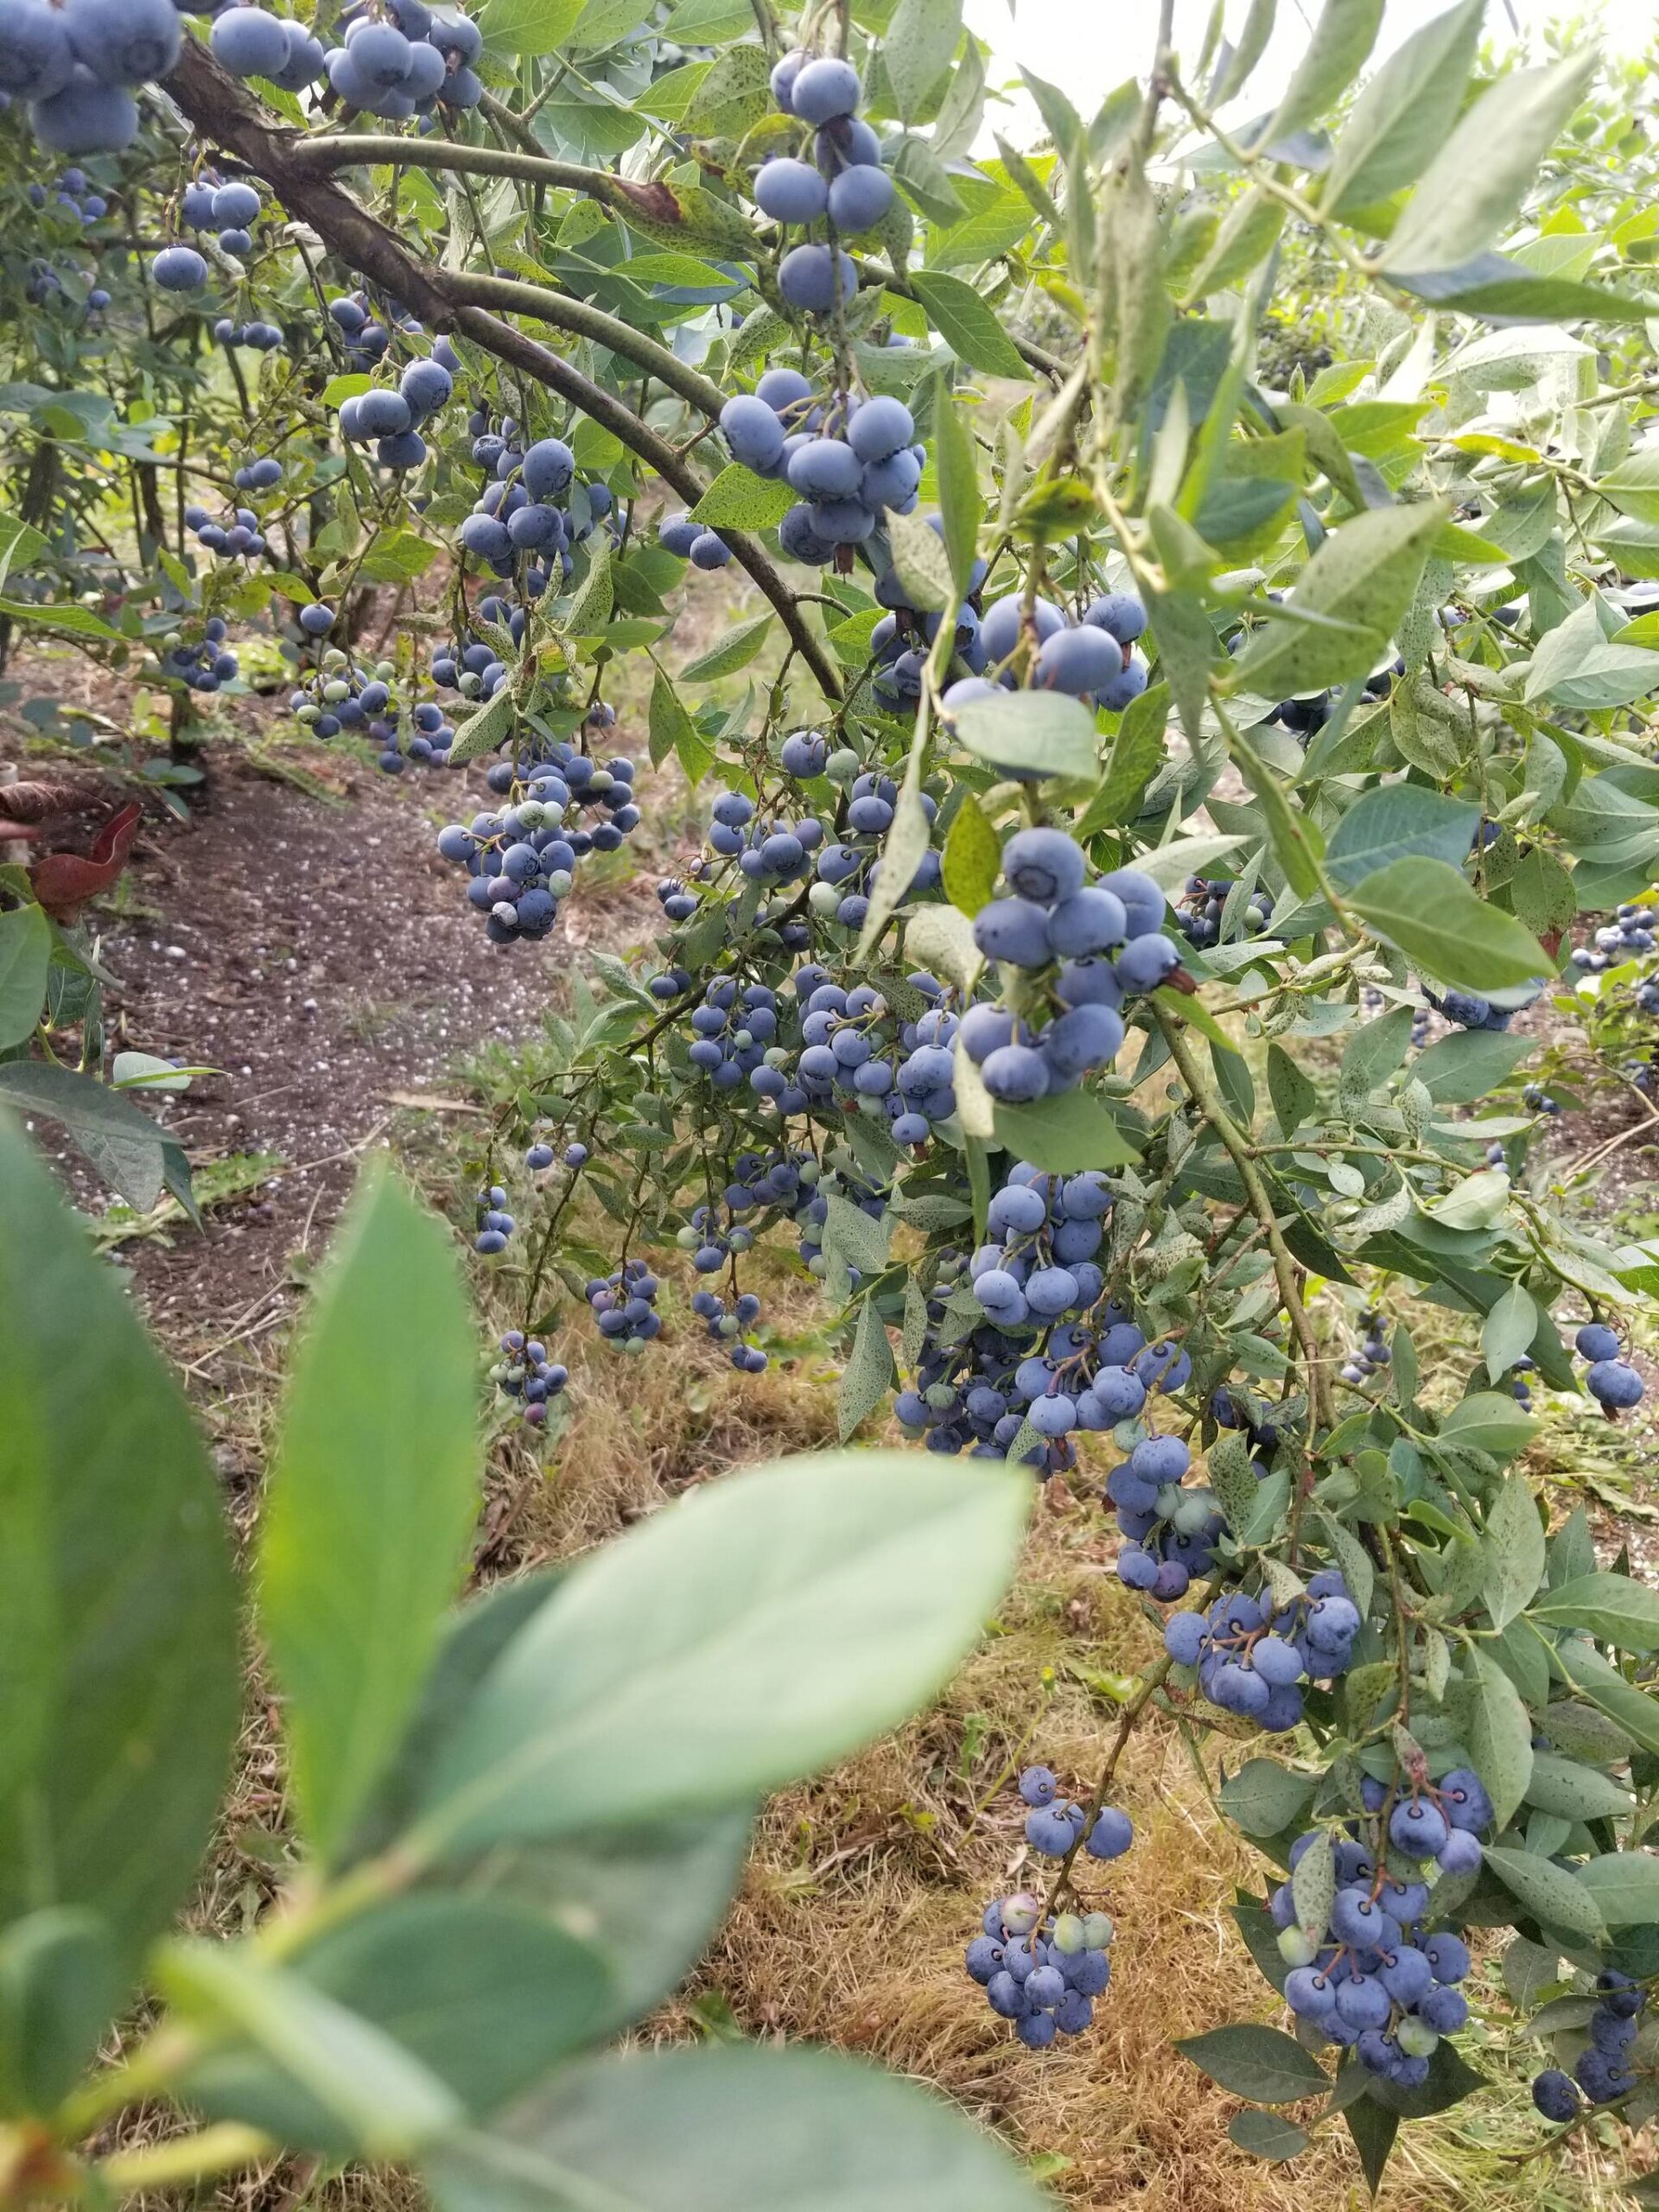 Blueberries at Silva Family Farm will be available for picking this weekend. (Photo provided)